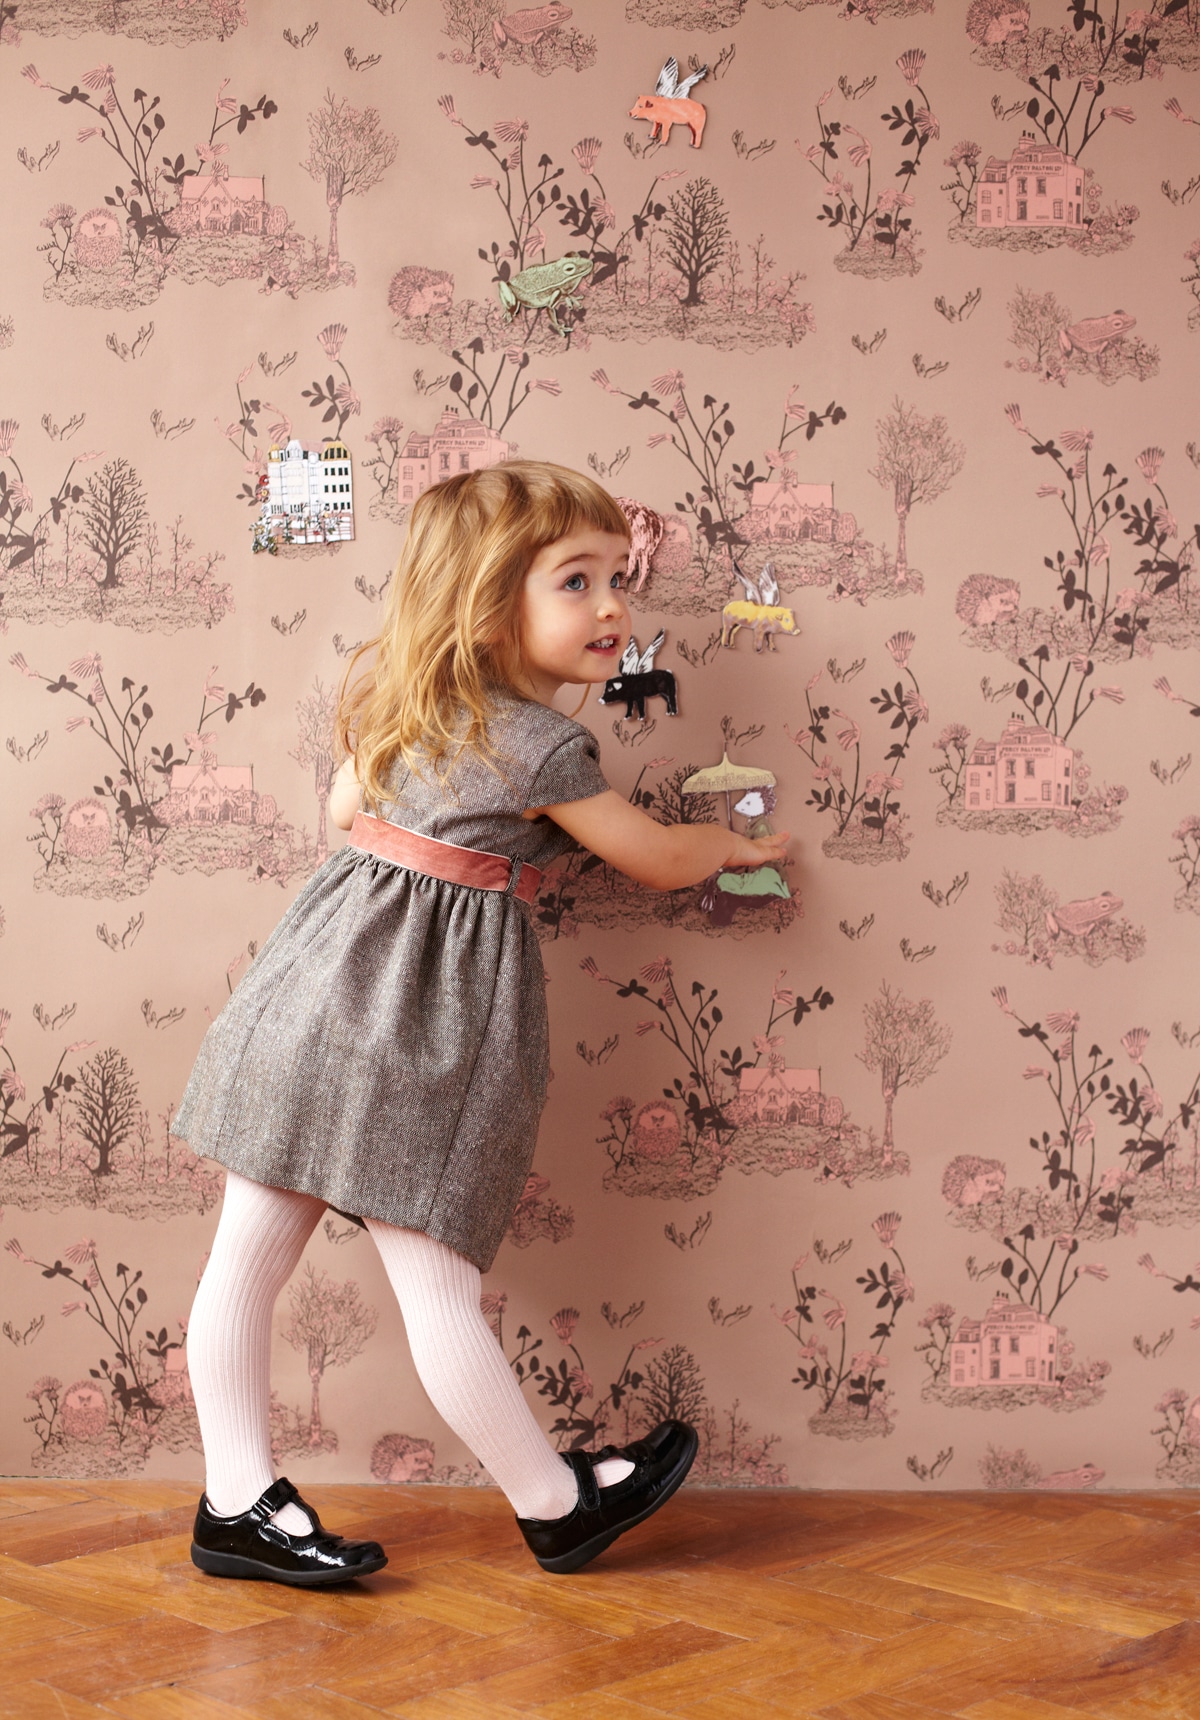 Magnetic Wallpaper Turns Ordinary Walls Into A Spontaneous Adventure